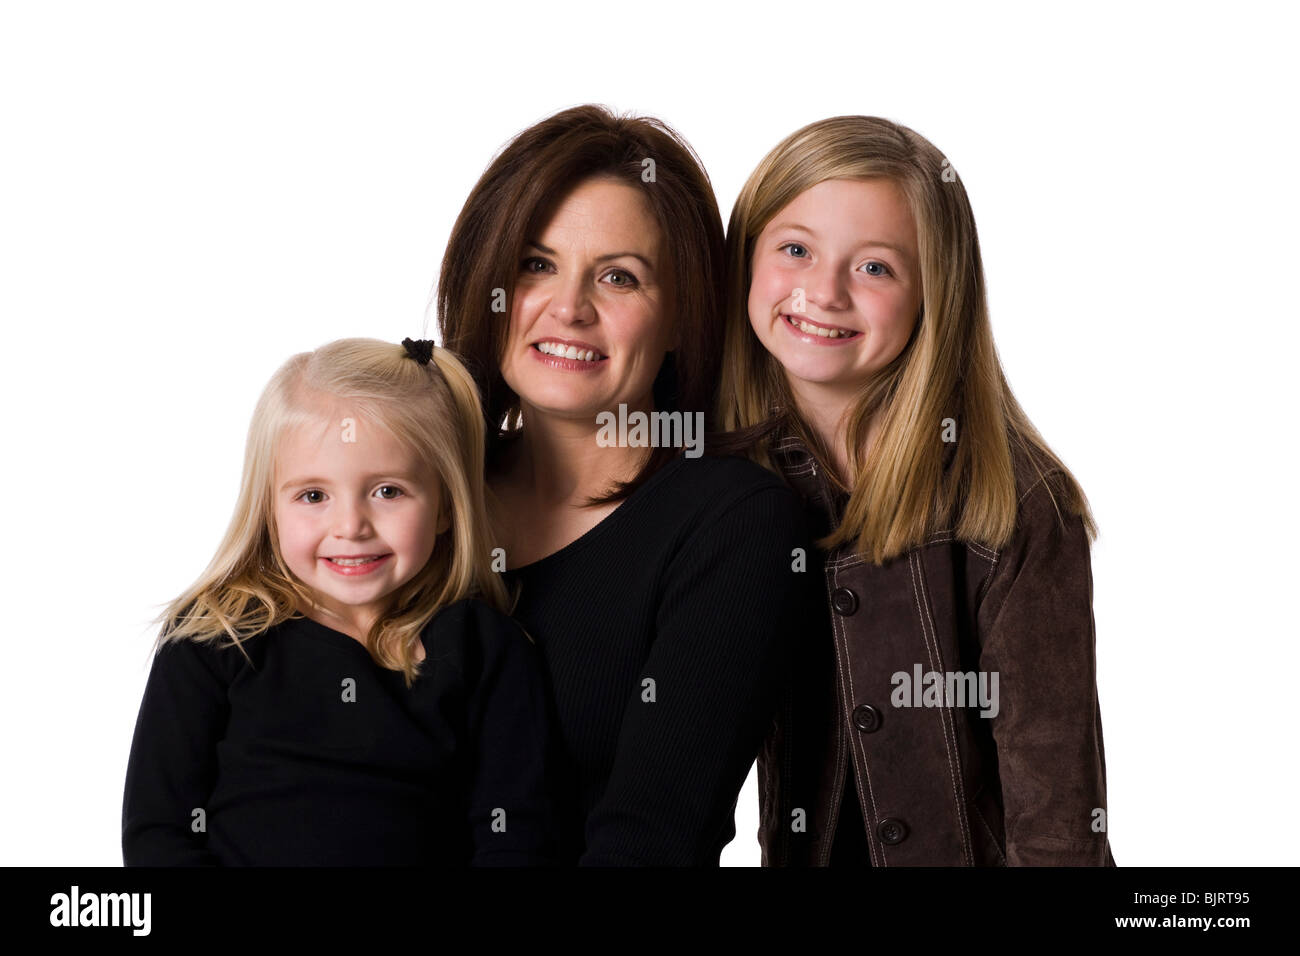 Mother posing with young daughters Stock Photo